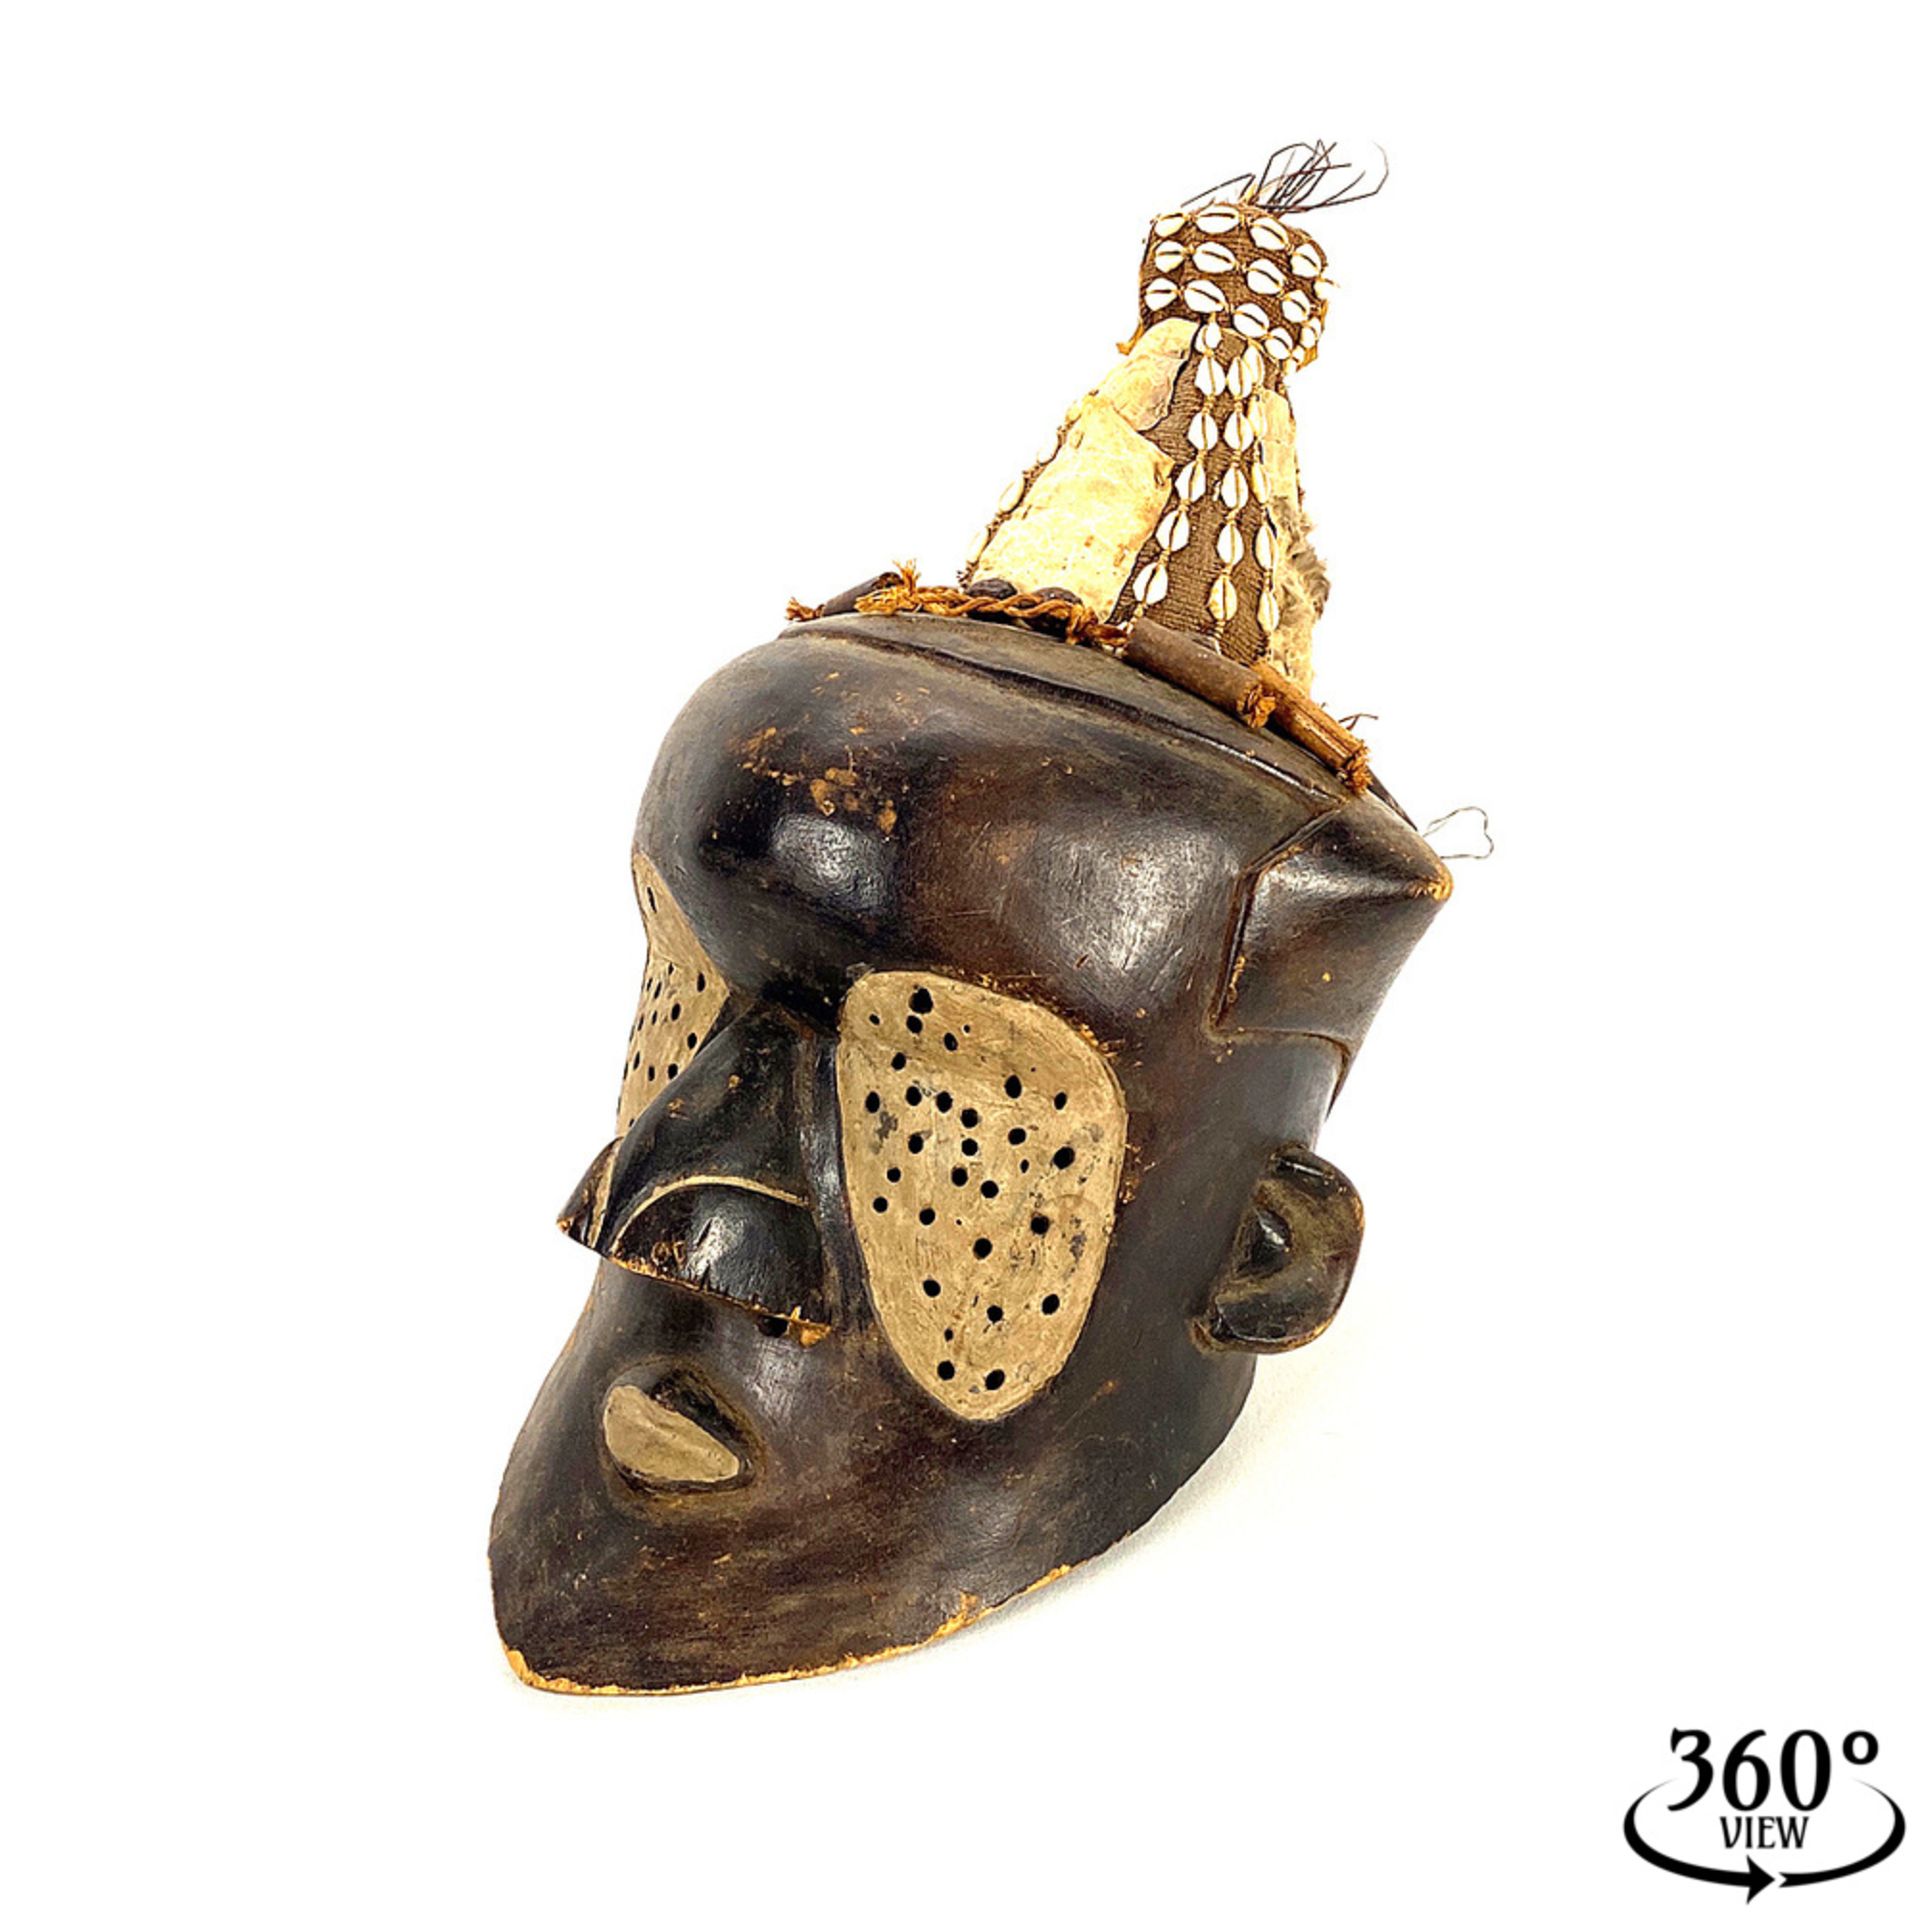 Bwoom mask with bell, Cuba, DR Congo